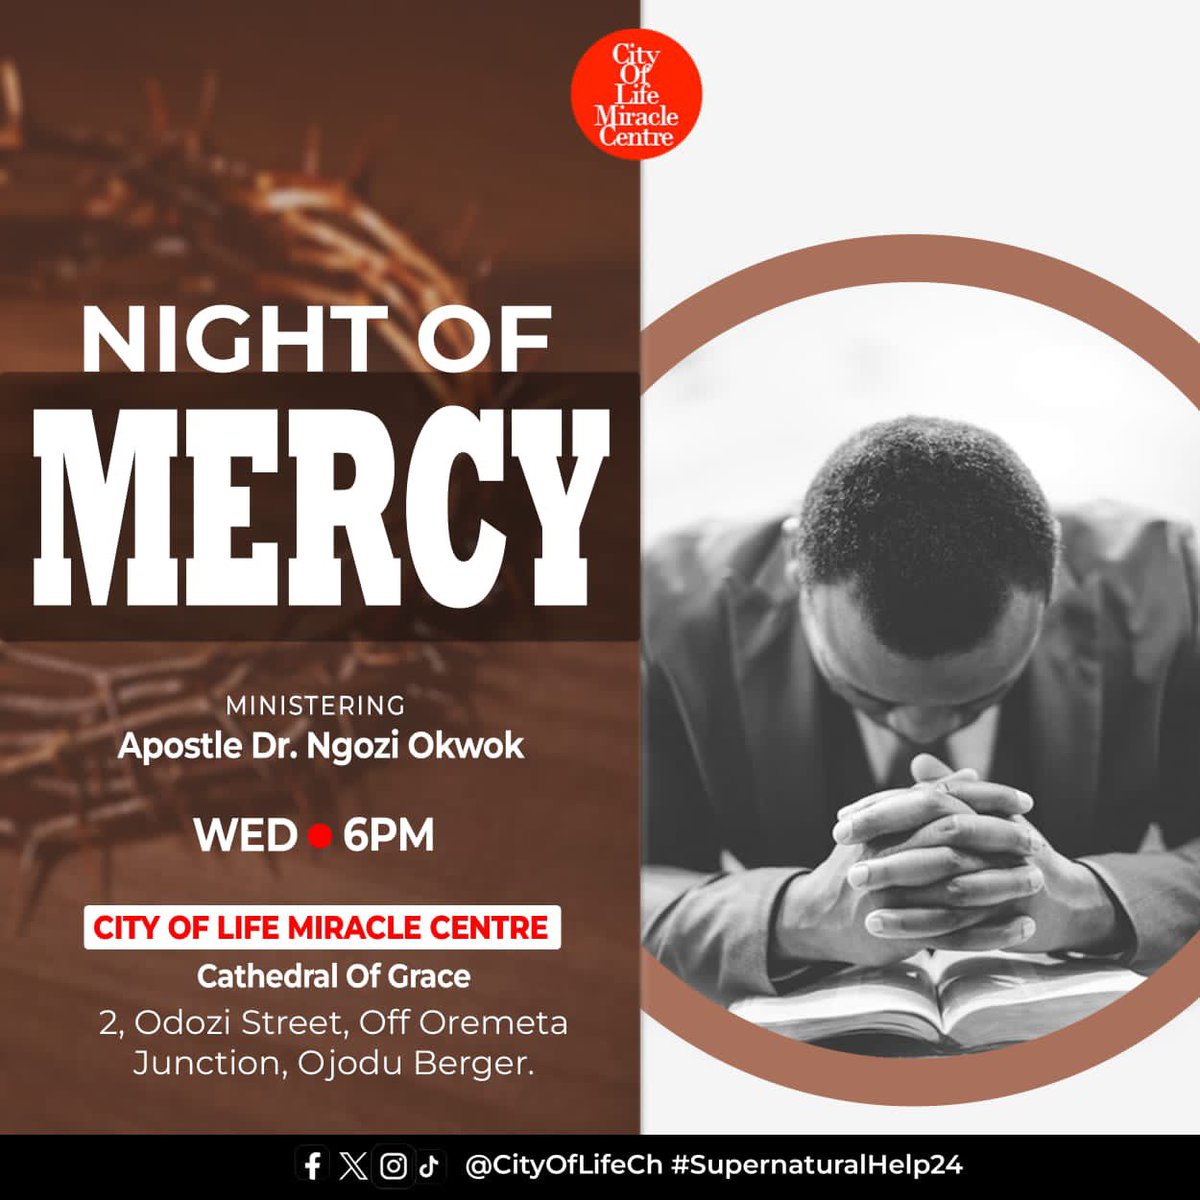 It’s our Night of Mercy and DAY 16 of the 21 DAYS FASTING AND PRAYERS 🔥🔥🔥.

To wait on God’s answer, voice, or promise in prayer is an essential part of our walk with God. 

#cityoflifech #21daysfastingprayers #nightofmercy #supernaturalhelp24